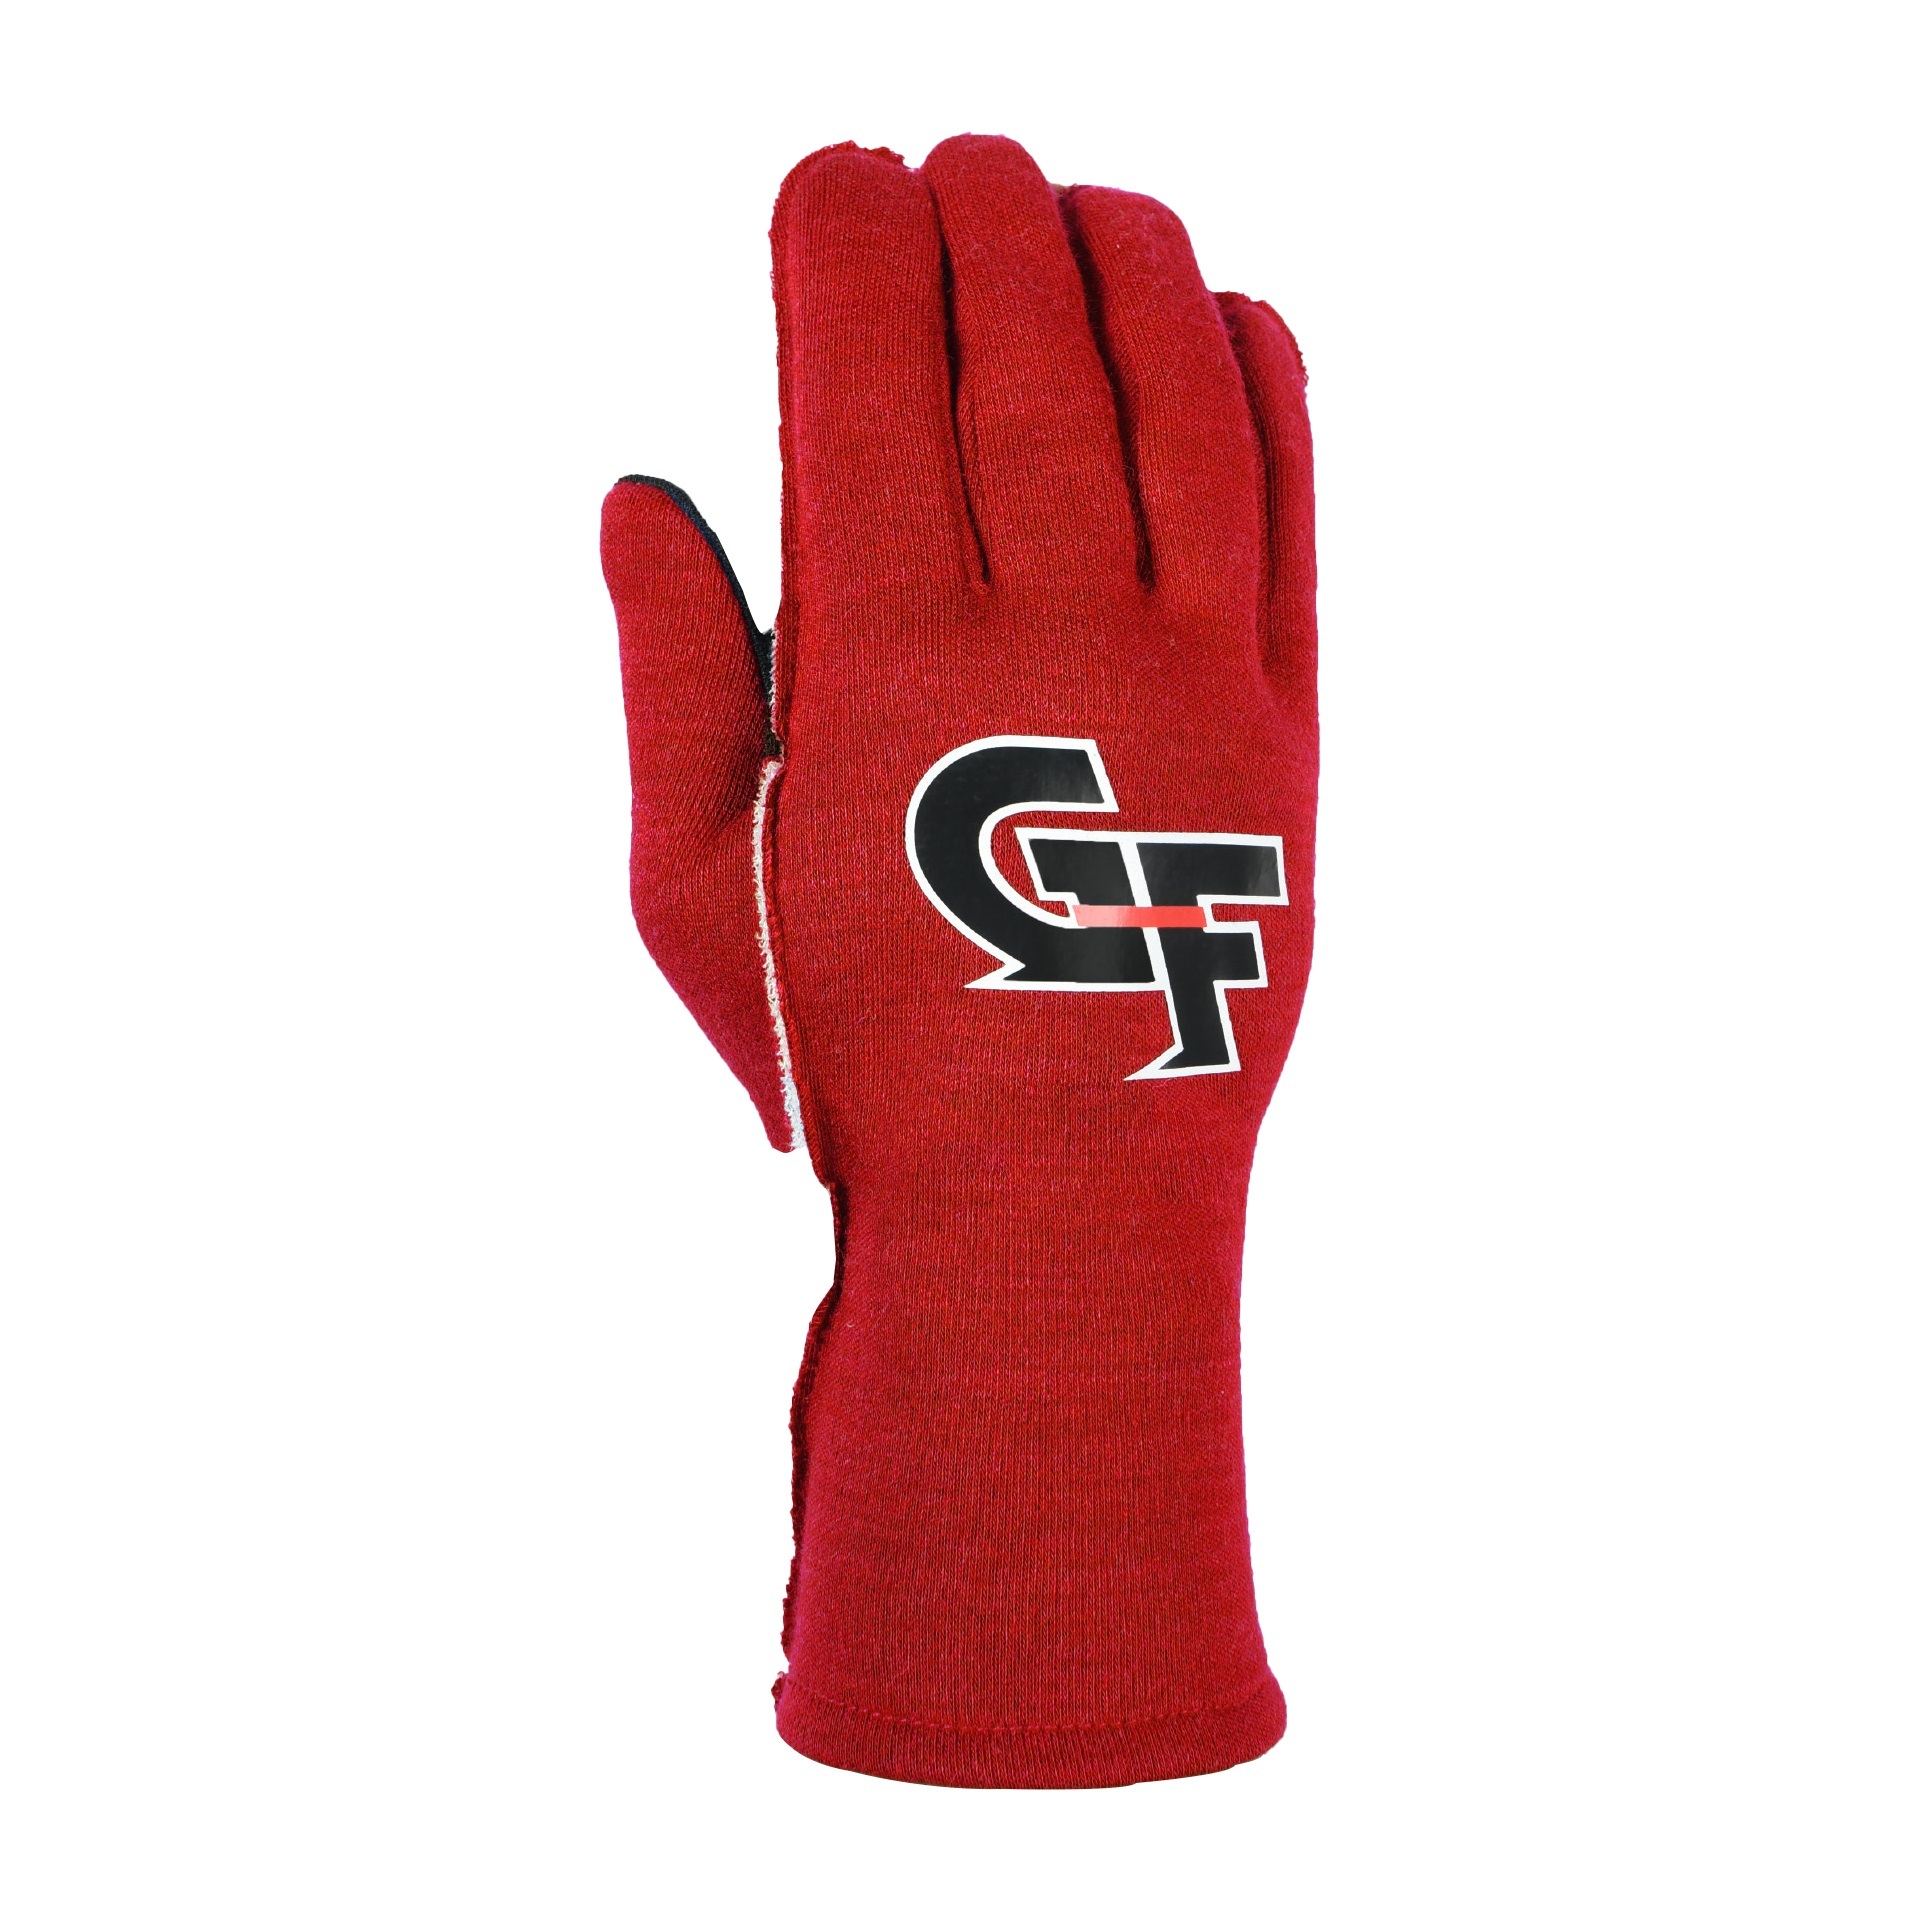 G-FORCE Gloves G-Limit Youth Medium Red